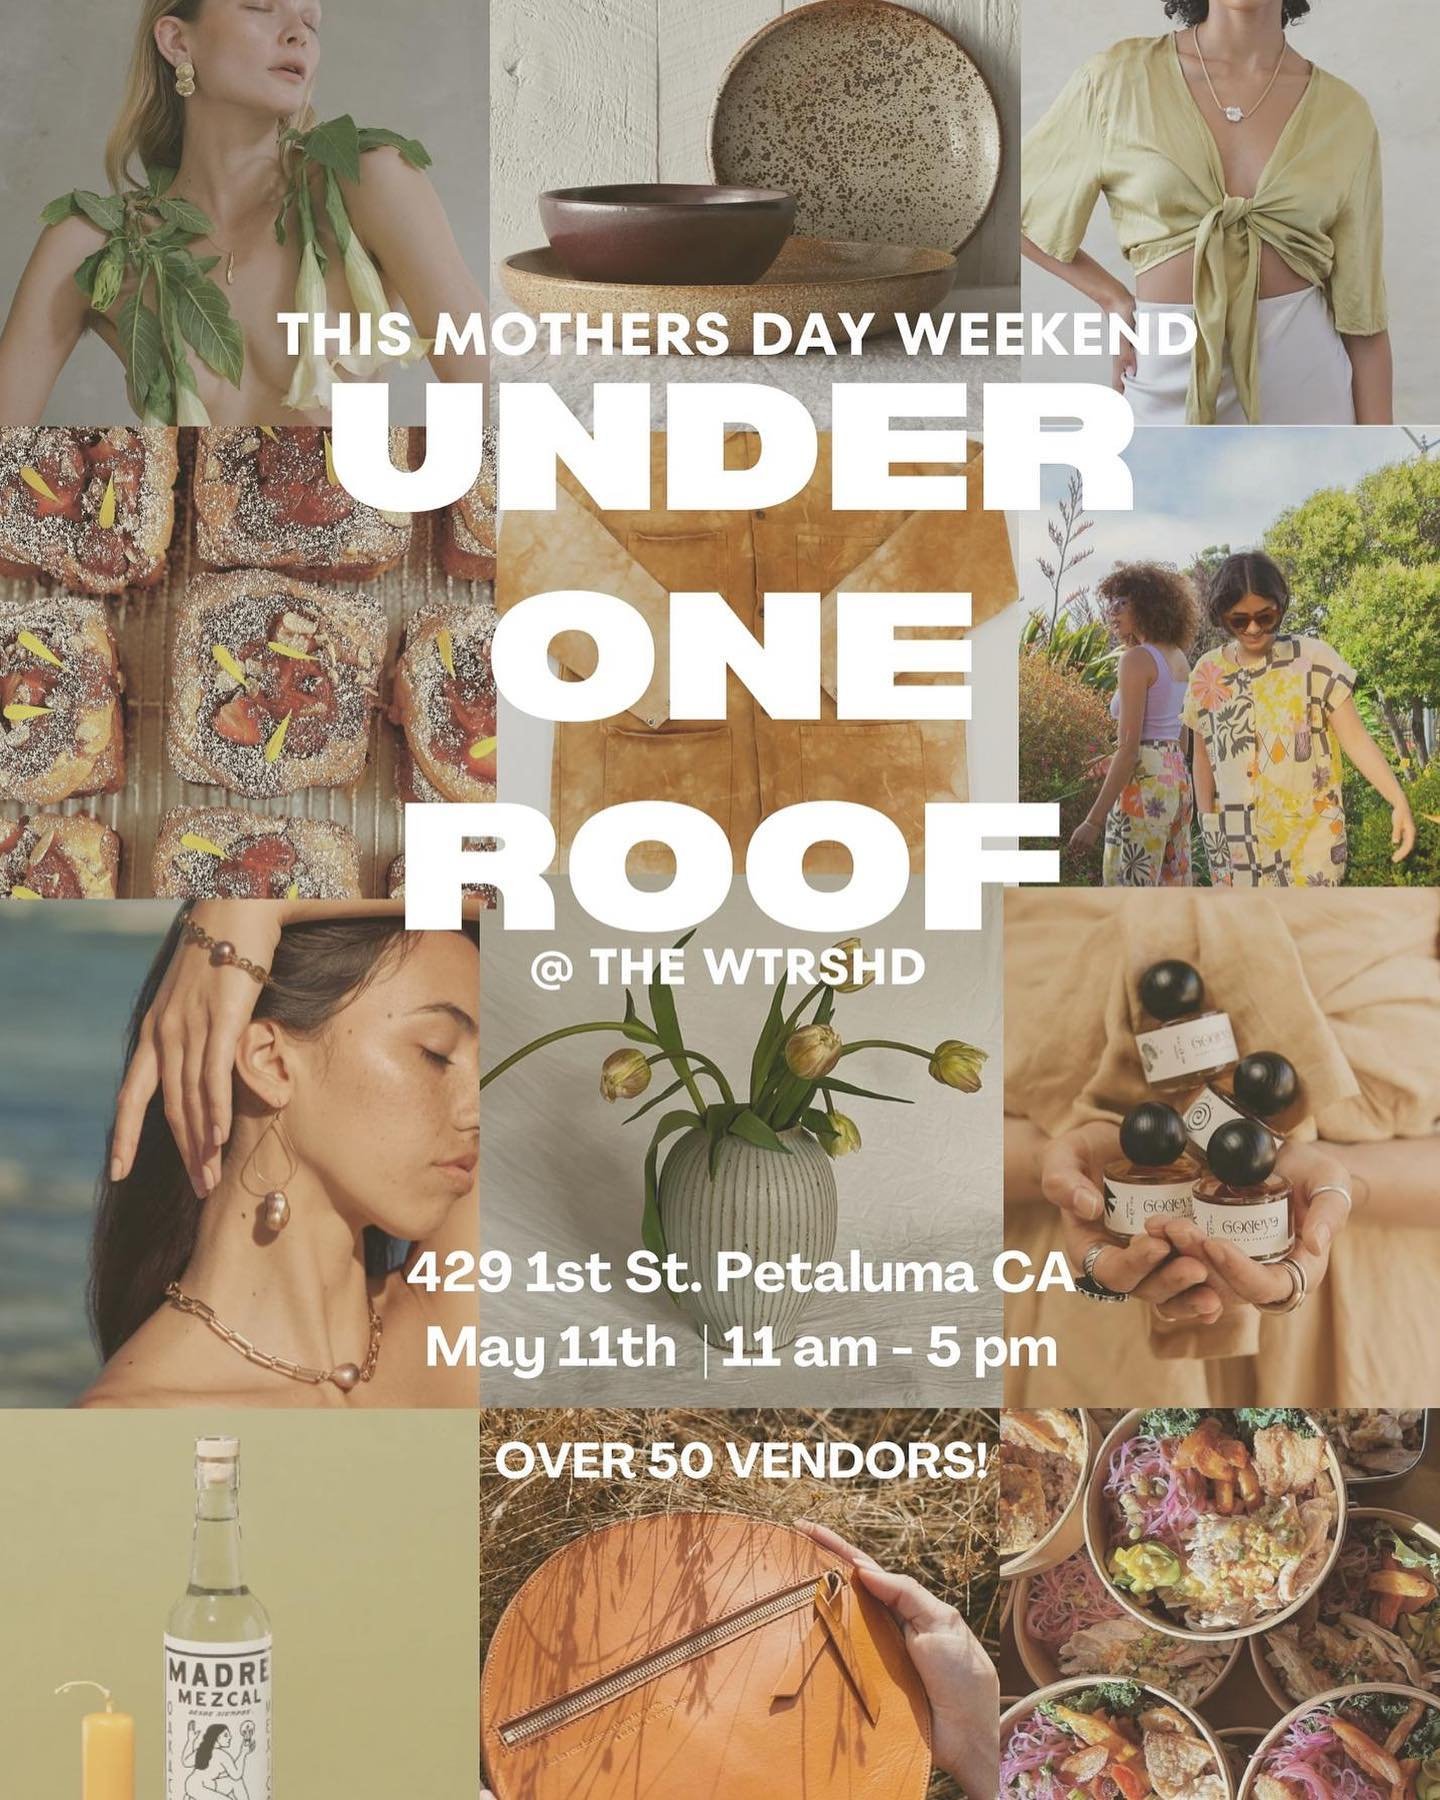 Join me and more than 50 Bay Area artisans and brands for a Mother&rsquo;s Day weekend pop-up marketplace @underoneroofpetaluma ! Sip, shop, munch &amp; mingle Saturday 05.11 from 11am-5pm @thewtrshd in Petaluma 

I&rsquo;ll be bringing cookie gift b